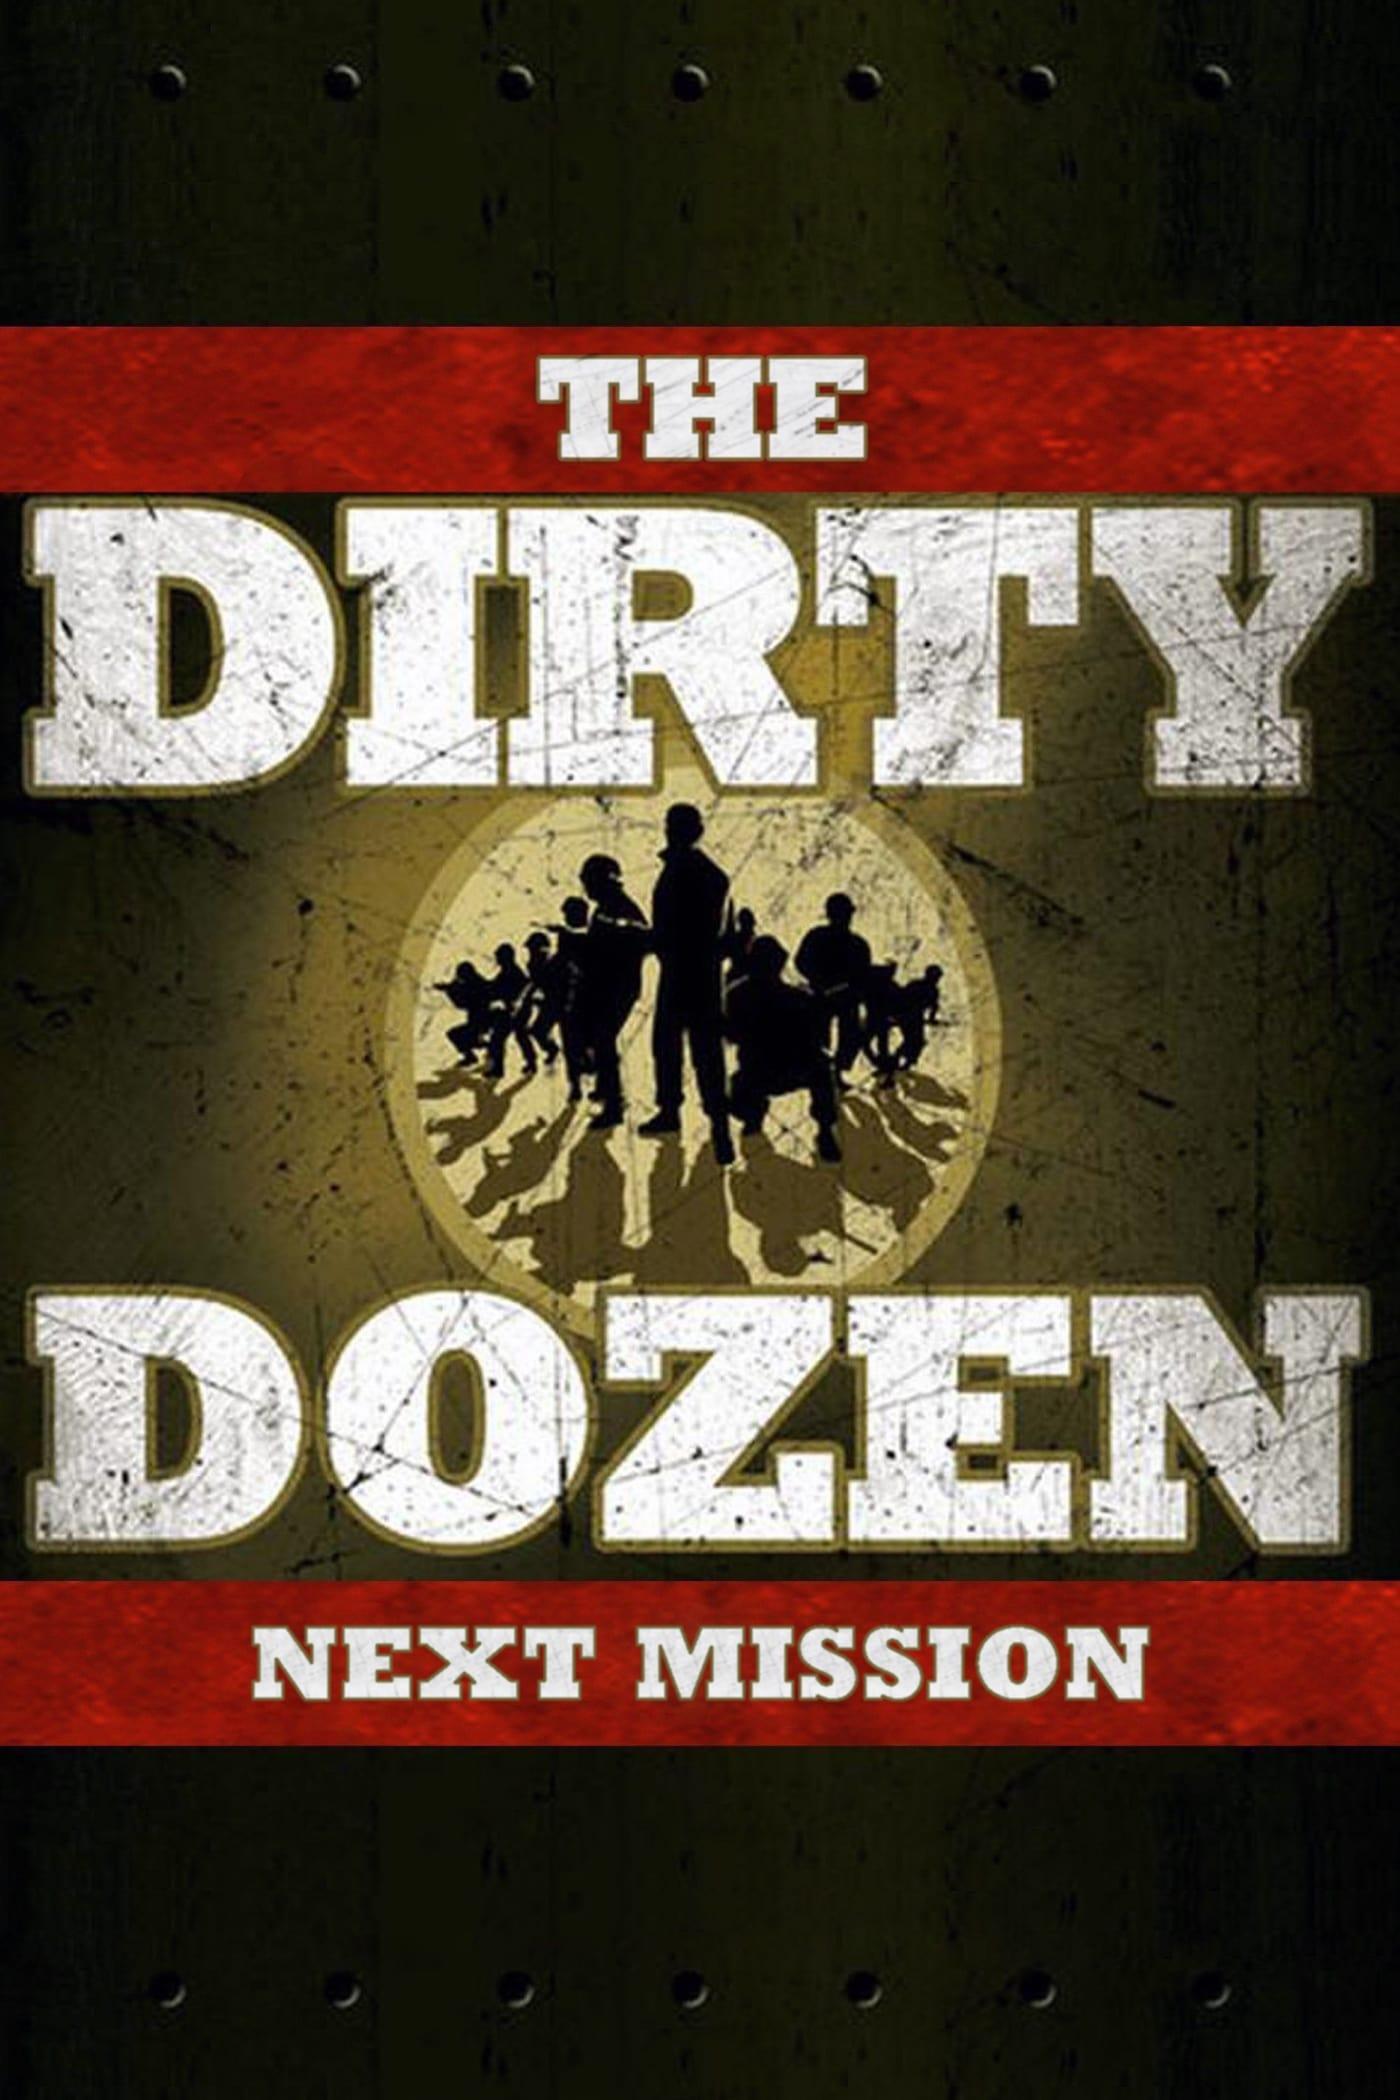 The Dirty Dozen: Next Mission poster